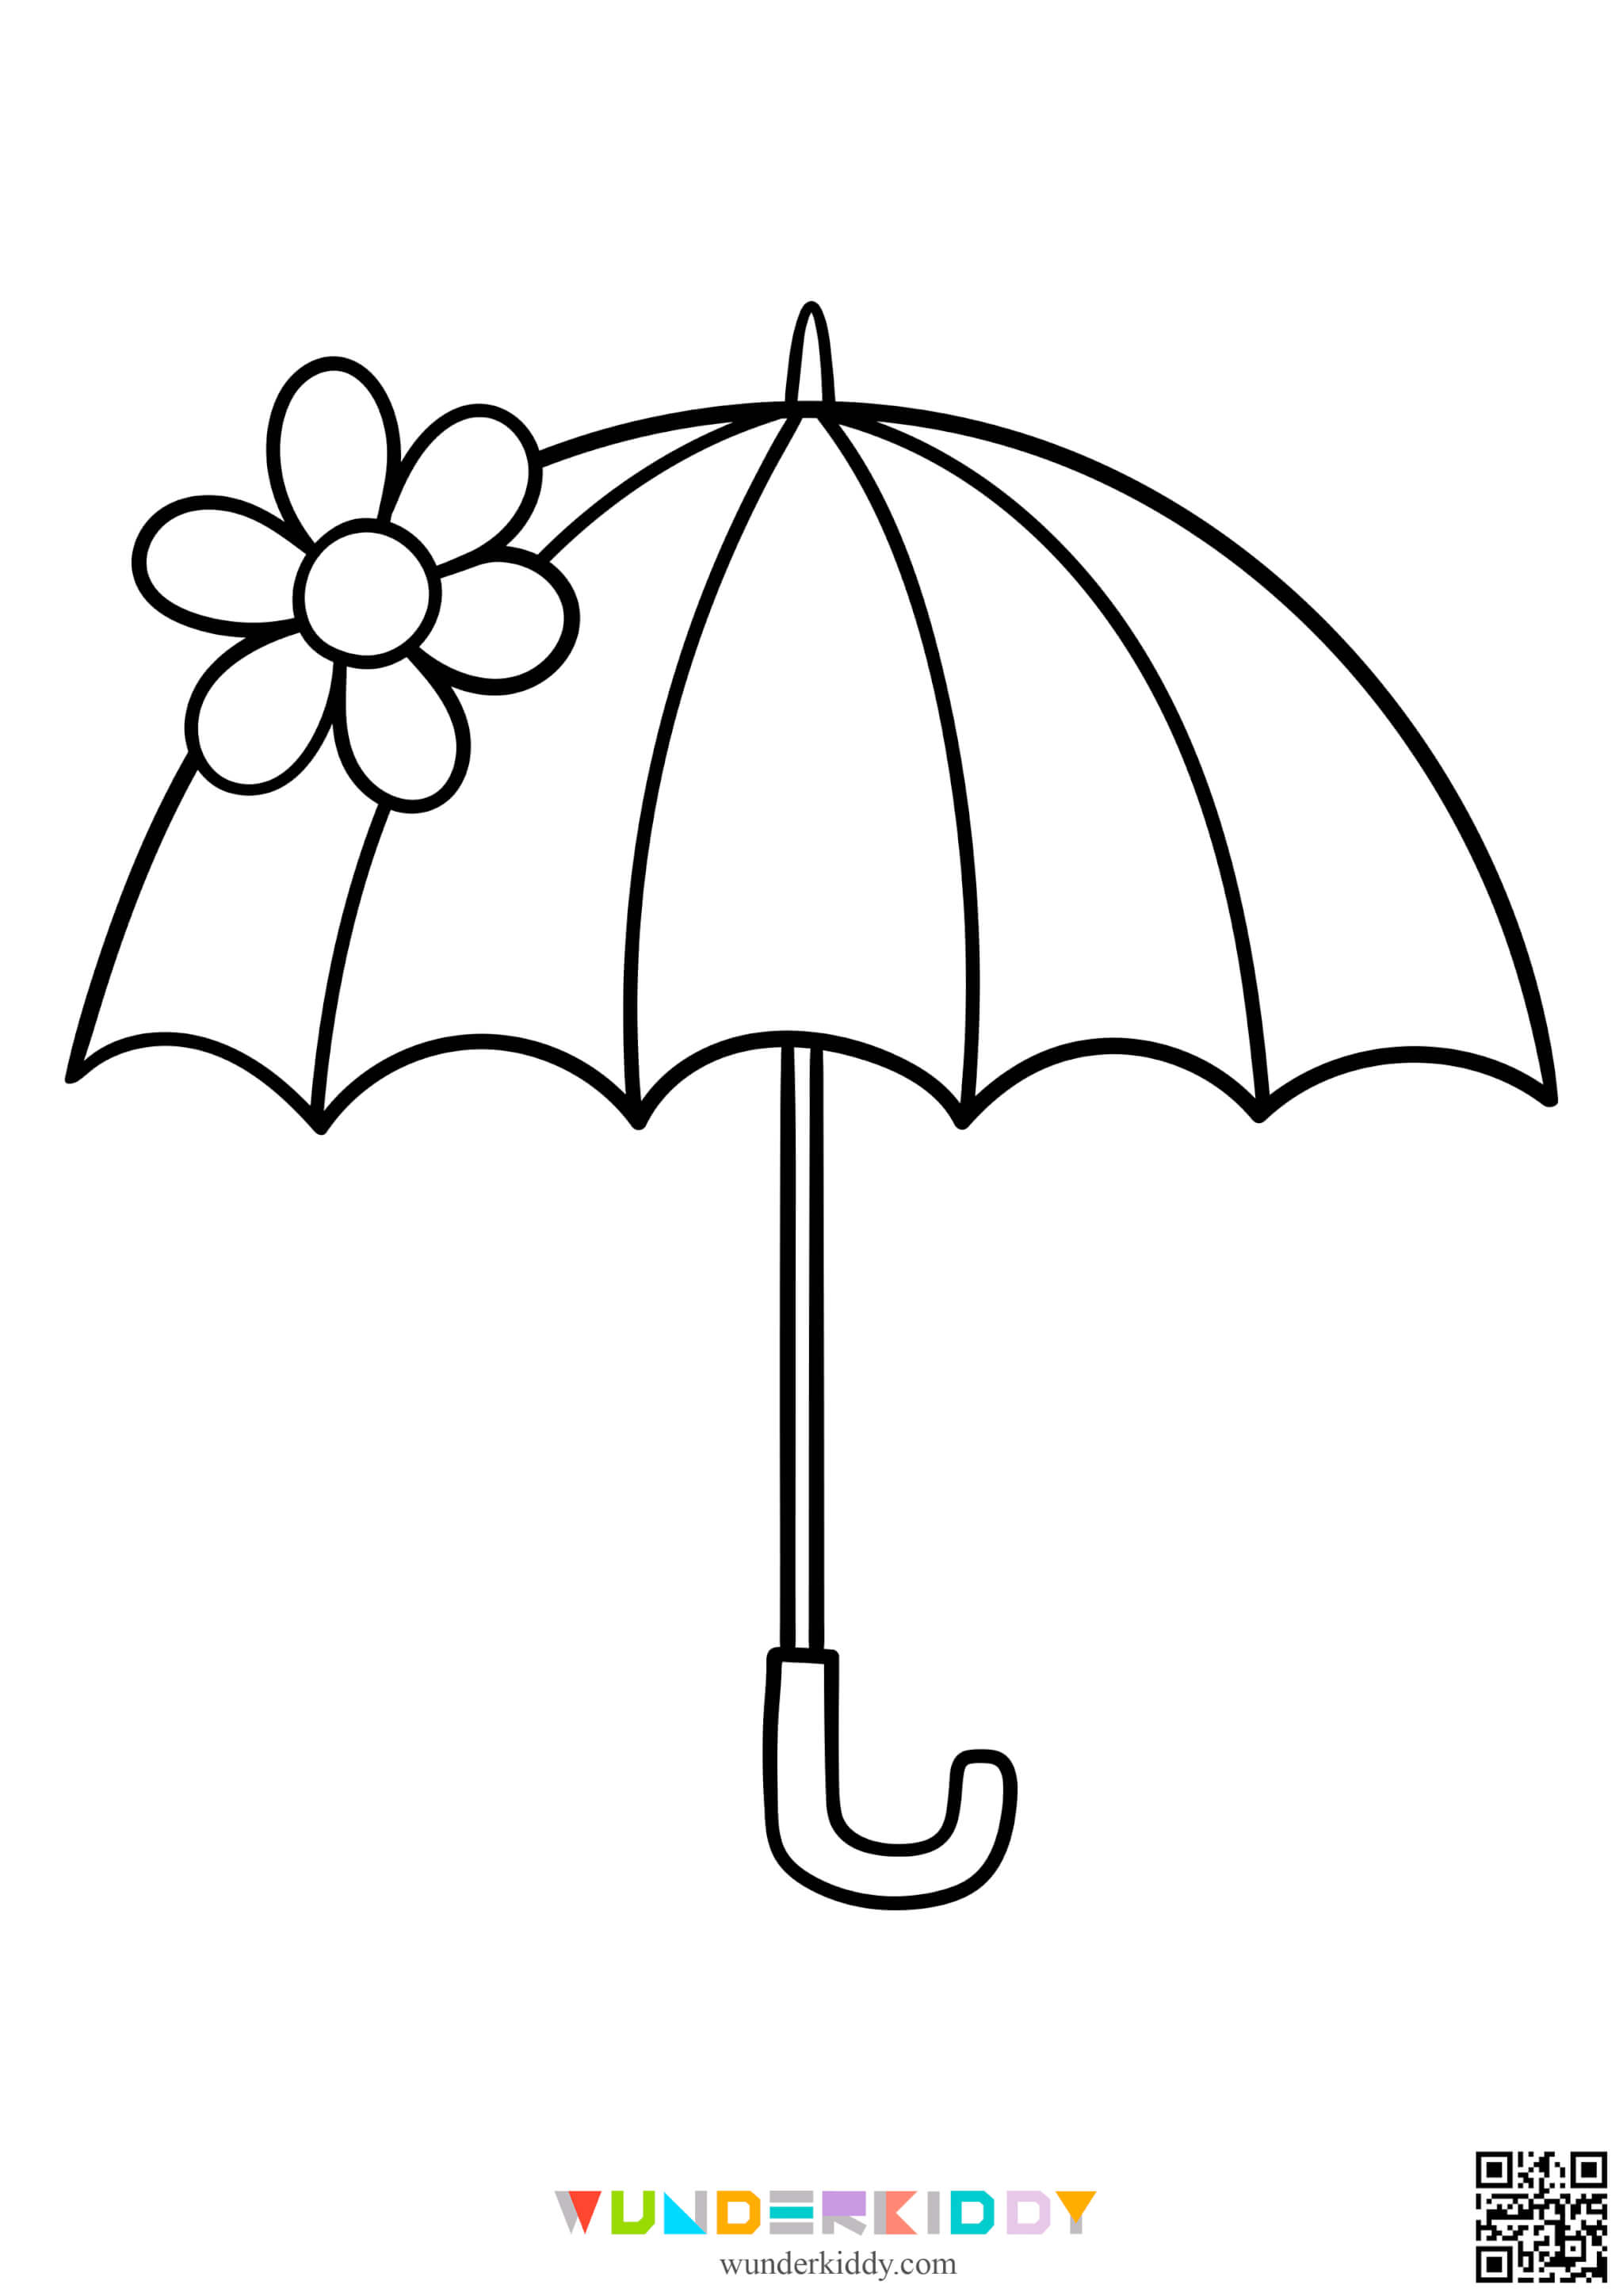 Spring Coloring Pages - Image 5